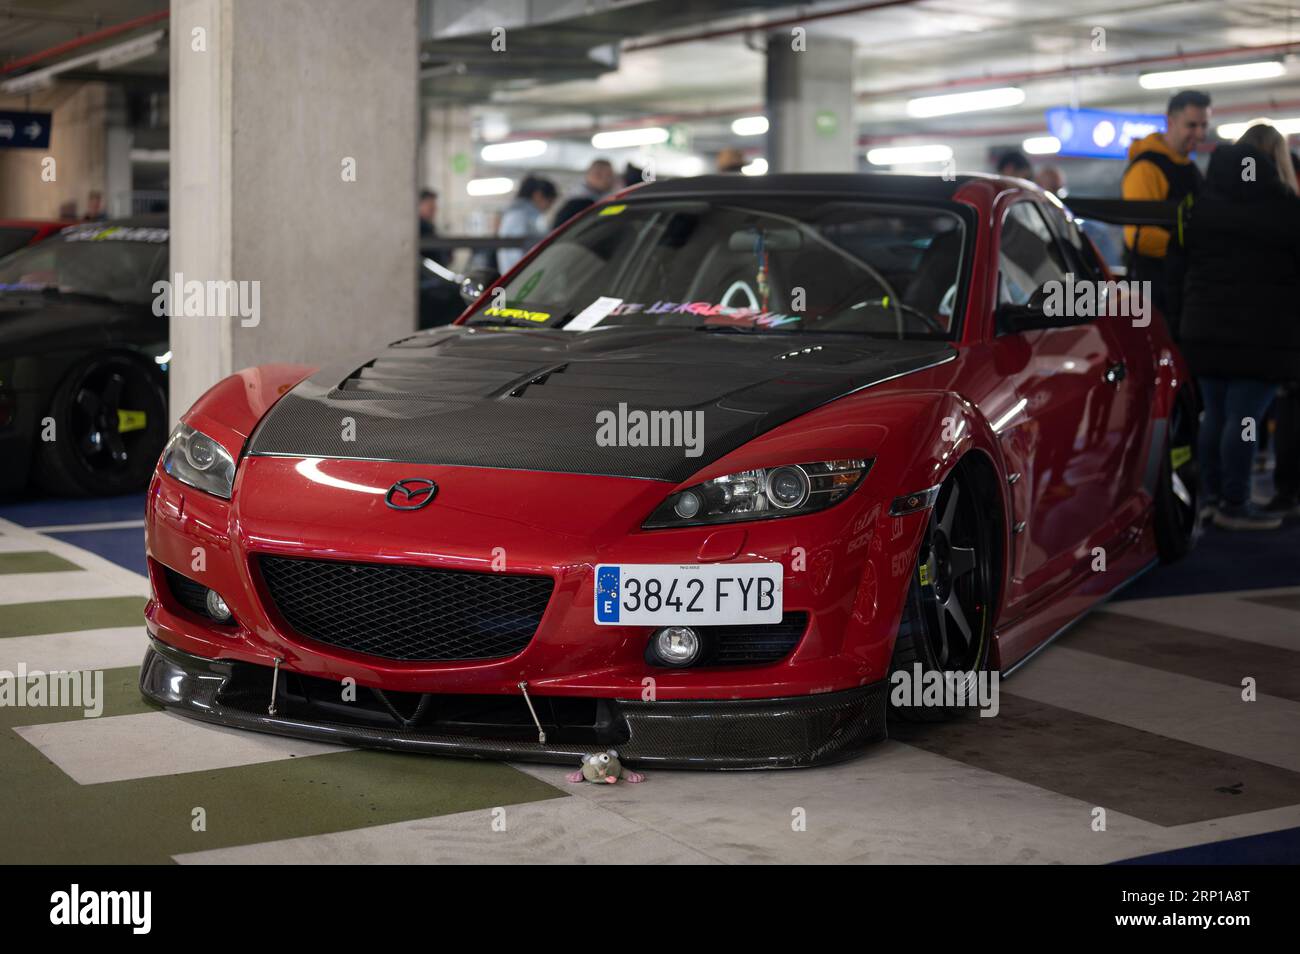 A red Mazda RX8 with black hood and lip modified for illegal racing Stock Photo